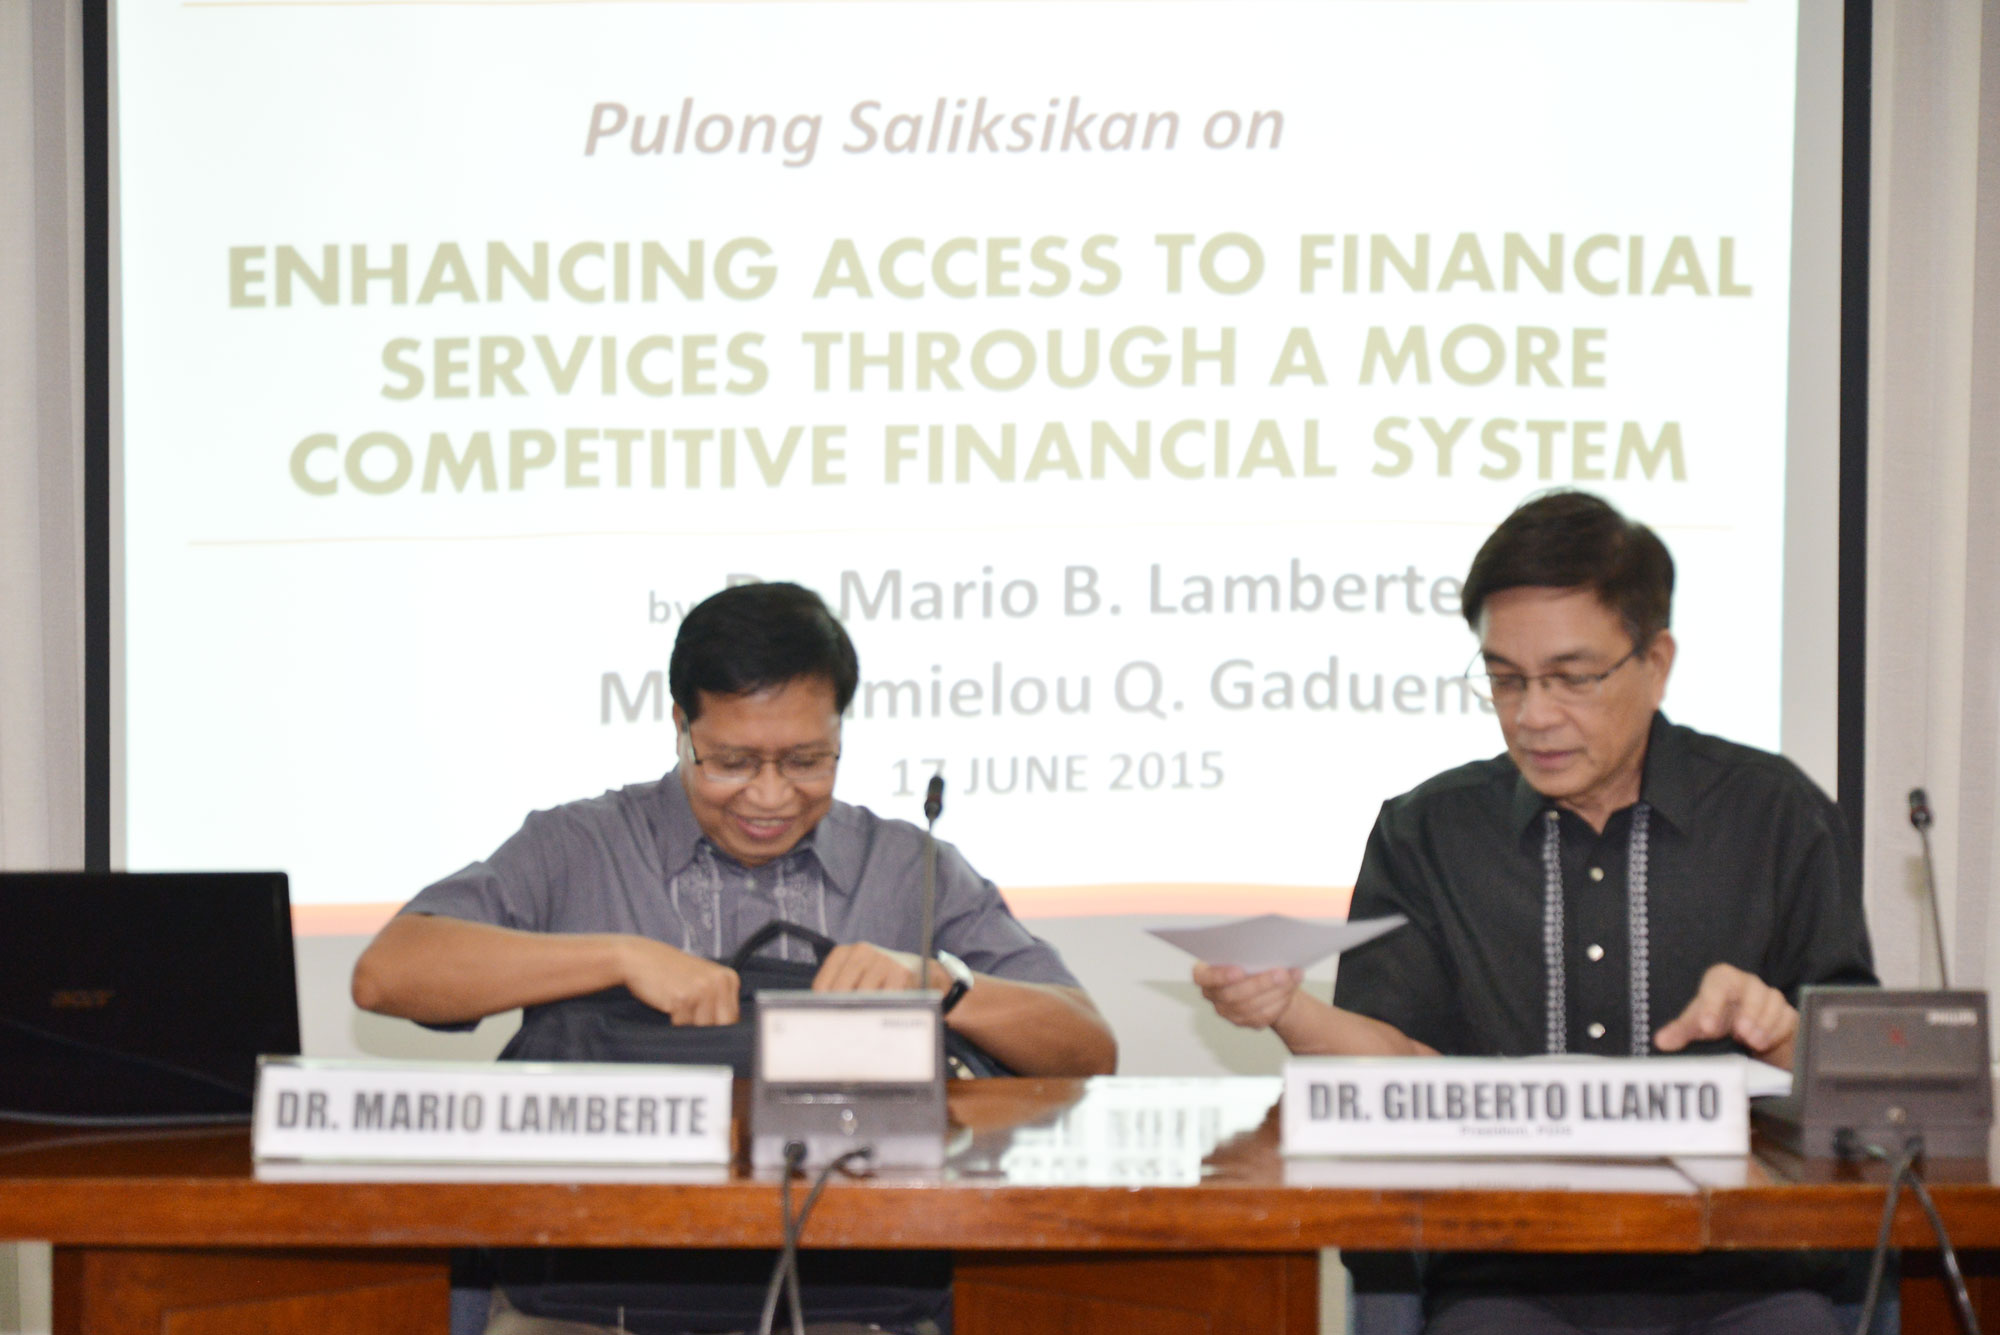 Pulong Saliksikan on Enhancing Access to Financial Services through a More Competitive Financial System-DSC_3527.jpg